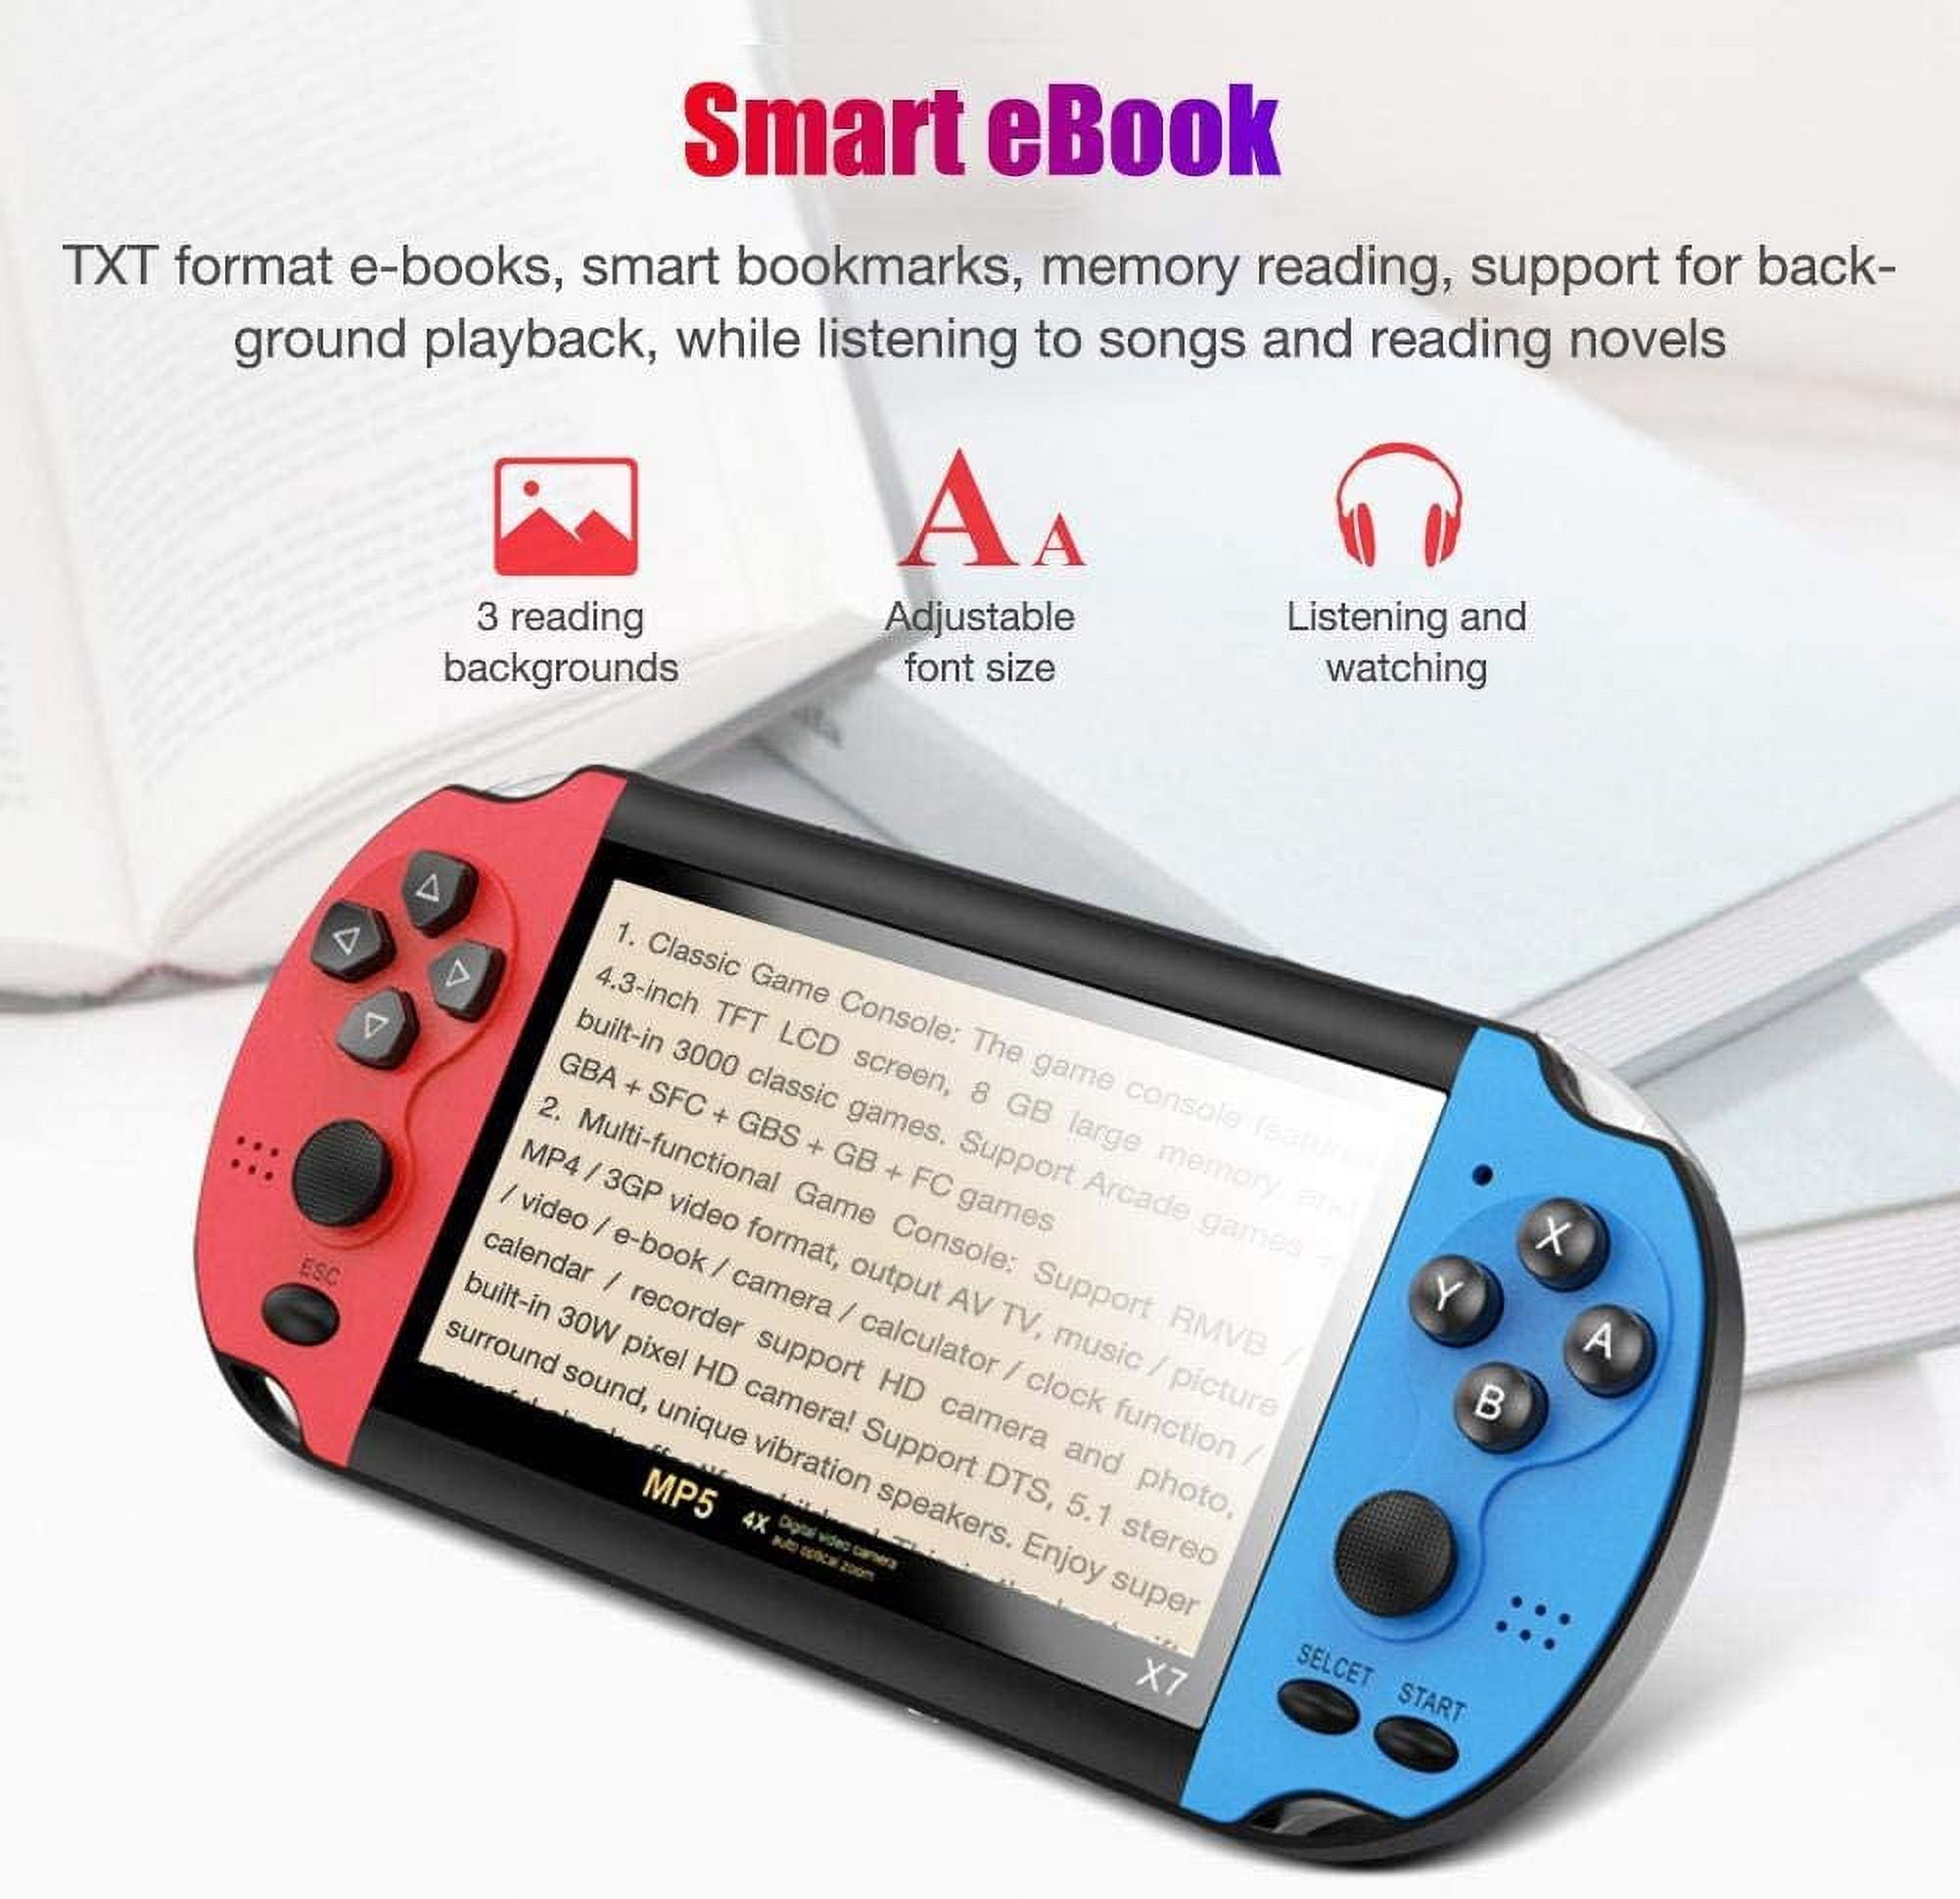 HAIHUANG PAPI Retro Game Console with 64G TF Card 5200 Classic Games Speed  FPS 1:1 Output,Handheld Game Console Supports 1280*720p 60HZ ,Portable Game